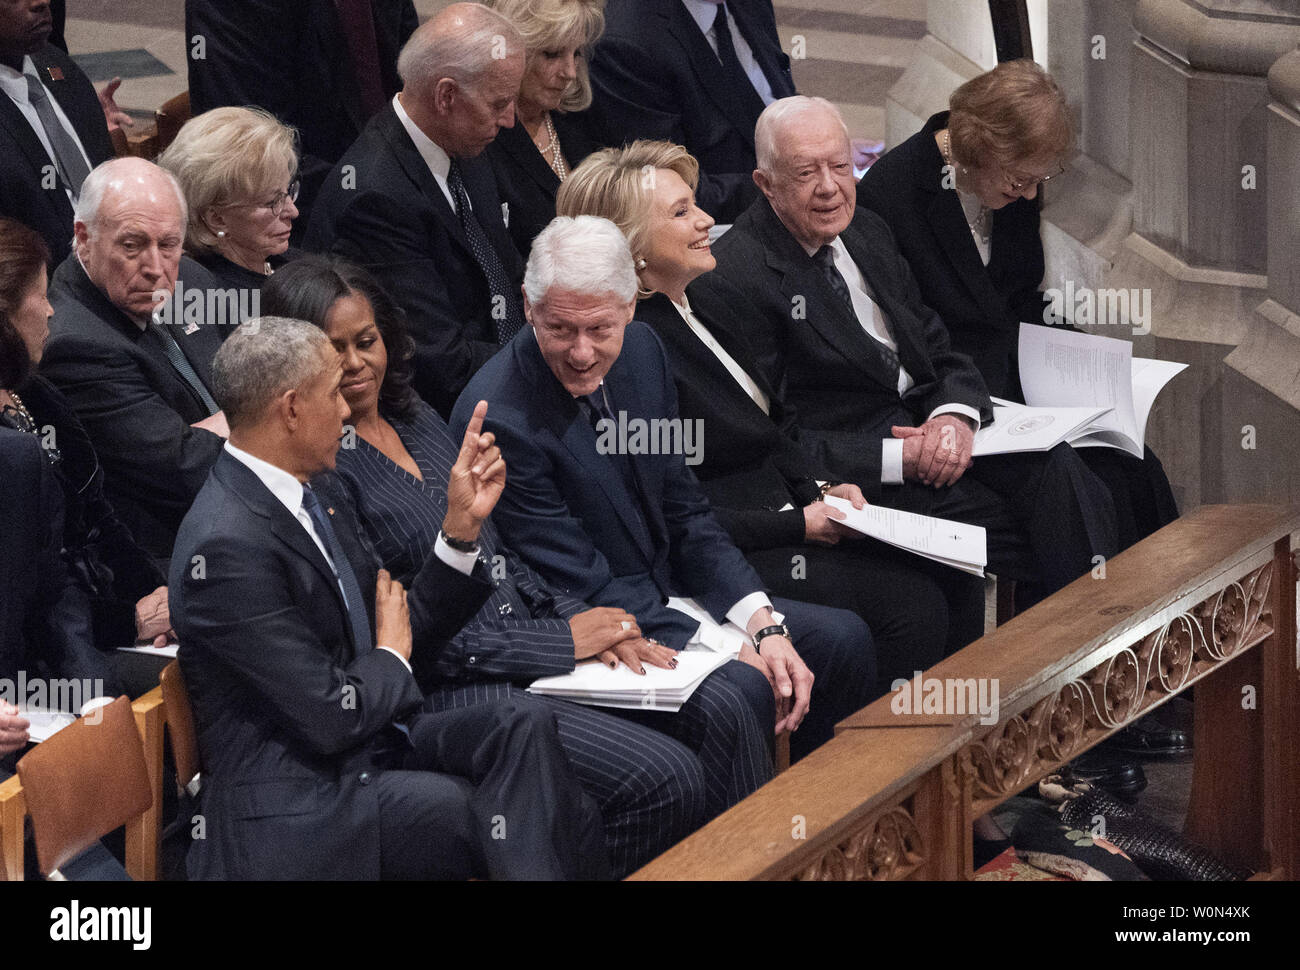 Barack Obama, Michelle Obama, Bill Clinton, Hillary Clinton, Jimmy Carter and Rosalyn Carter attend the state funeral service of former President George H. W. Bush at the National Cathedral in Washington, DC on December 5, 2018.      Photo by Chris Kleponis/UPI Stock Photo